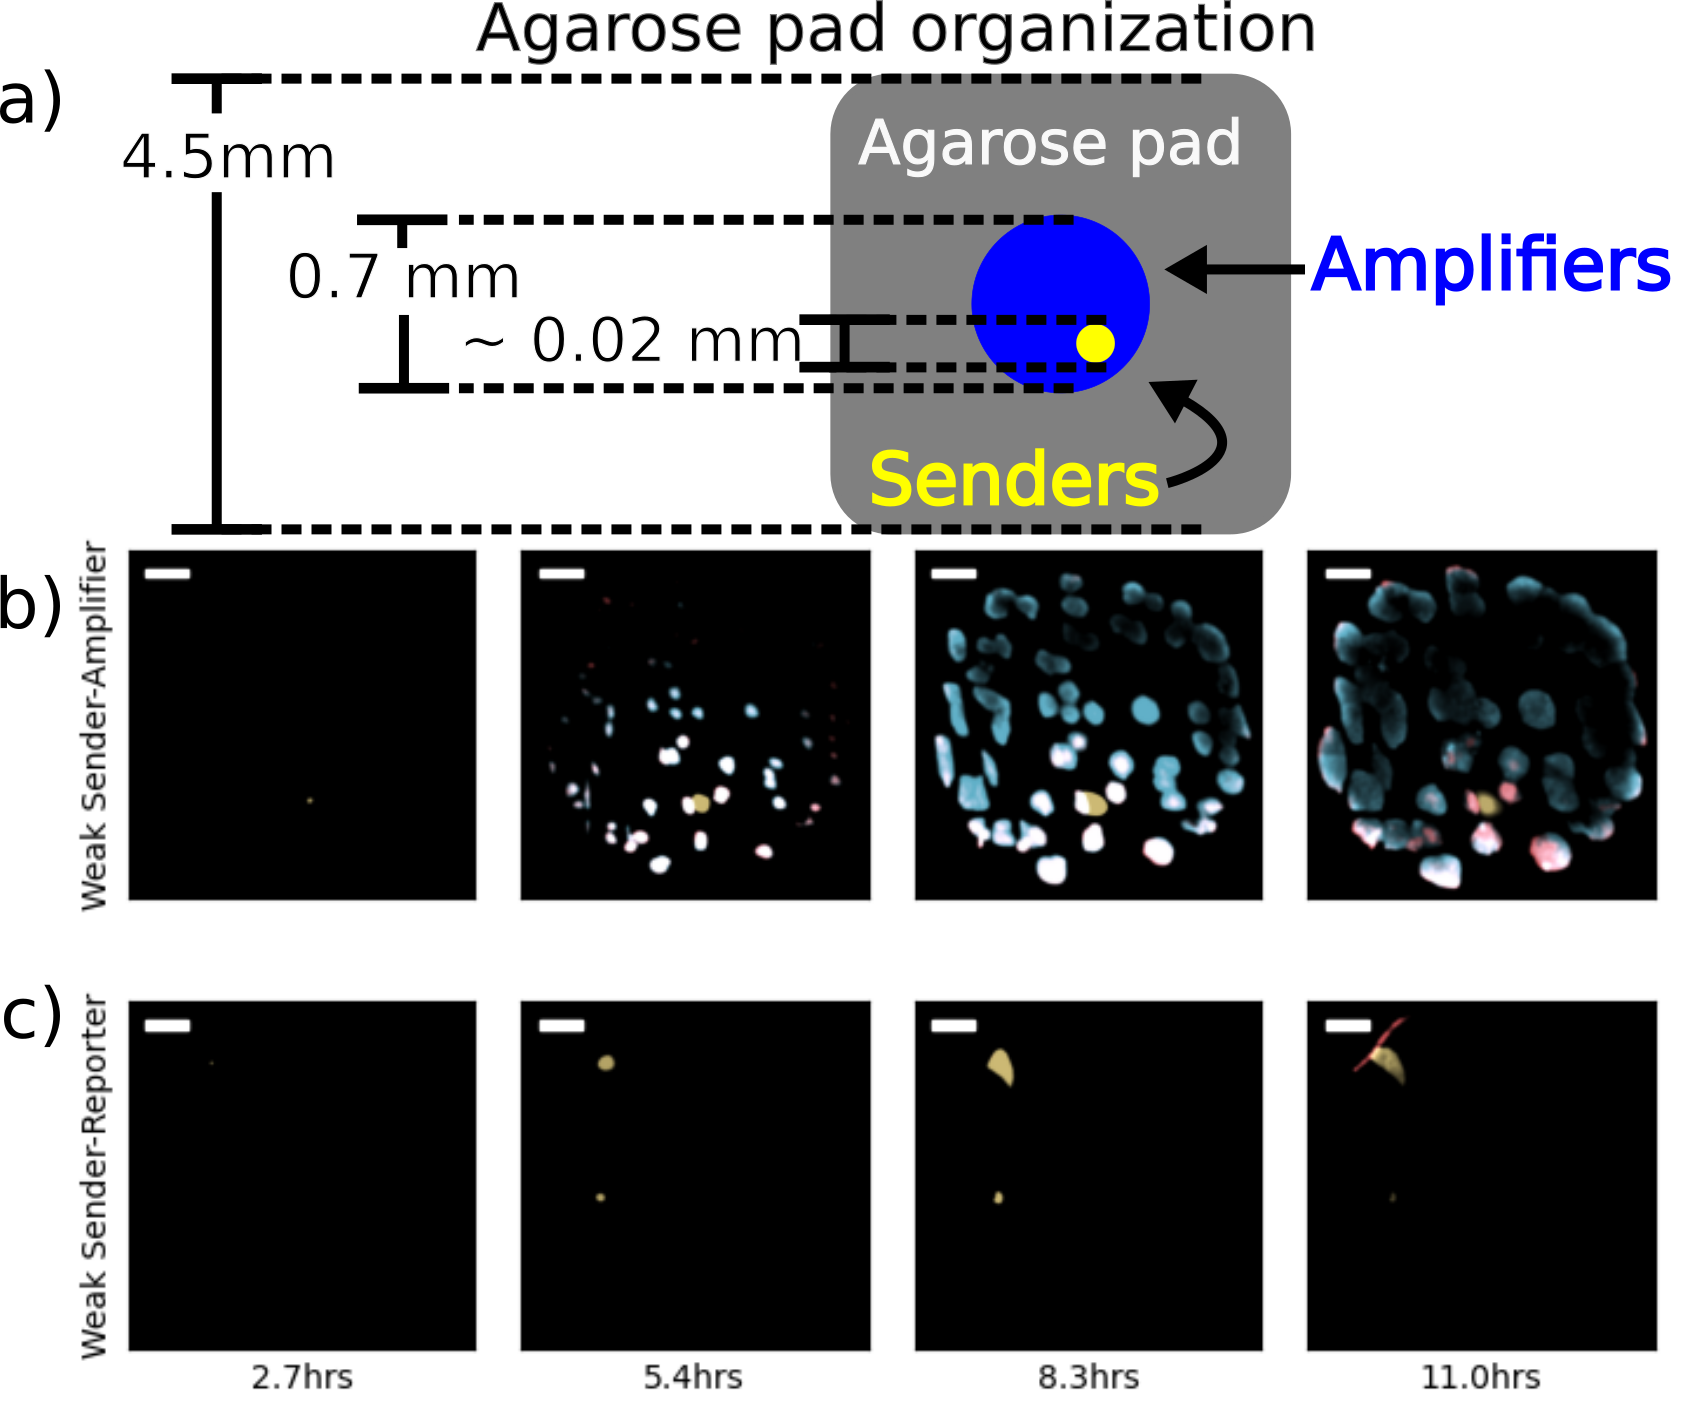 Fluorescence microscopy images of sender-amplifier consortia from two different agarose pads. The cartoon in (a) shows the size of the agarose pad and the consortium growing on it. The scenario depicted is one including a single sender population. Subfigures (b) and (c) show selected frames from experiments on sender-amplifier and sender-reporter consortia, respectively. The “Active” pad contains IPTG, thus enabling amplifier activity, while the “Inactive” pad does not. Each image is a composite of sfYFP, mScarlet-I, and SCFP3A expression. Scale bar is 100\(\mu\)m.